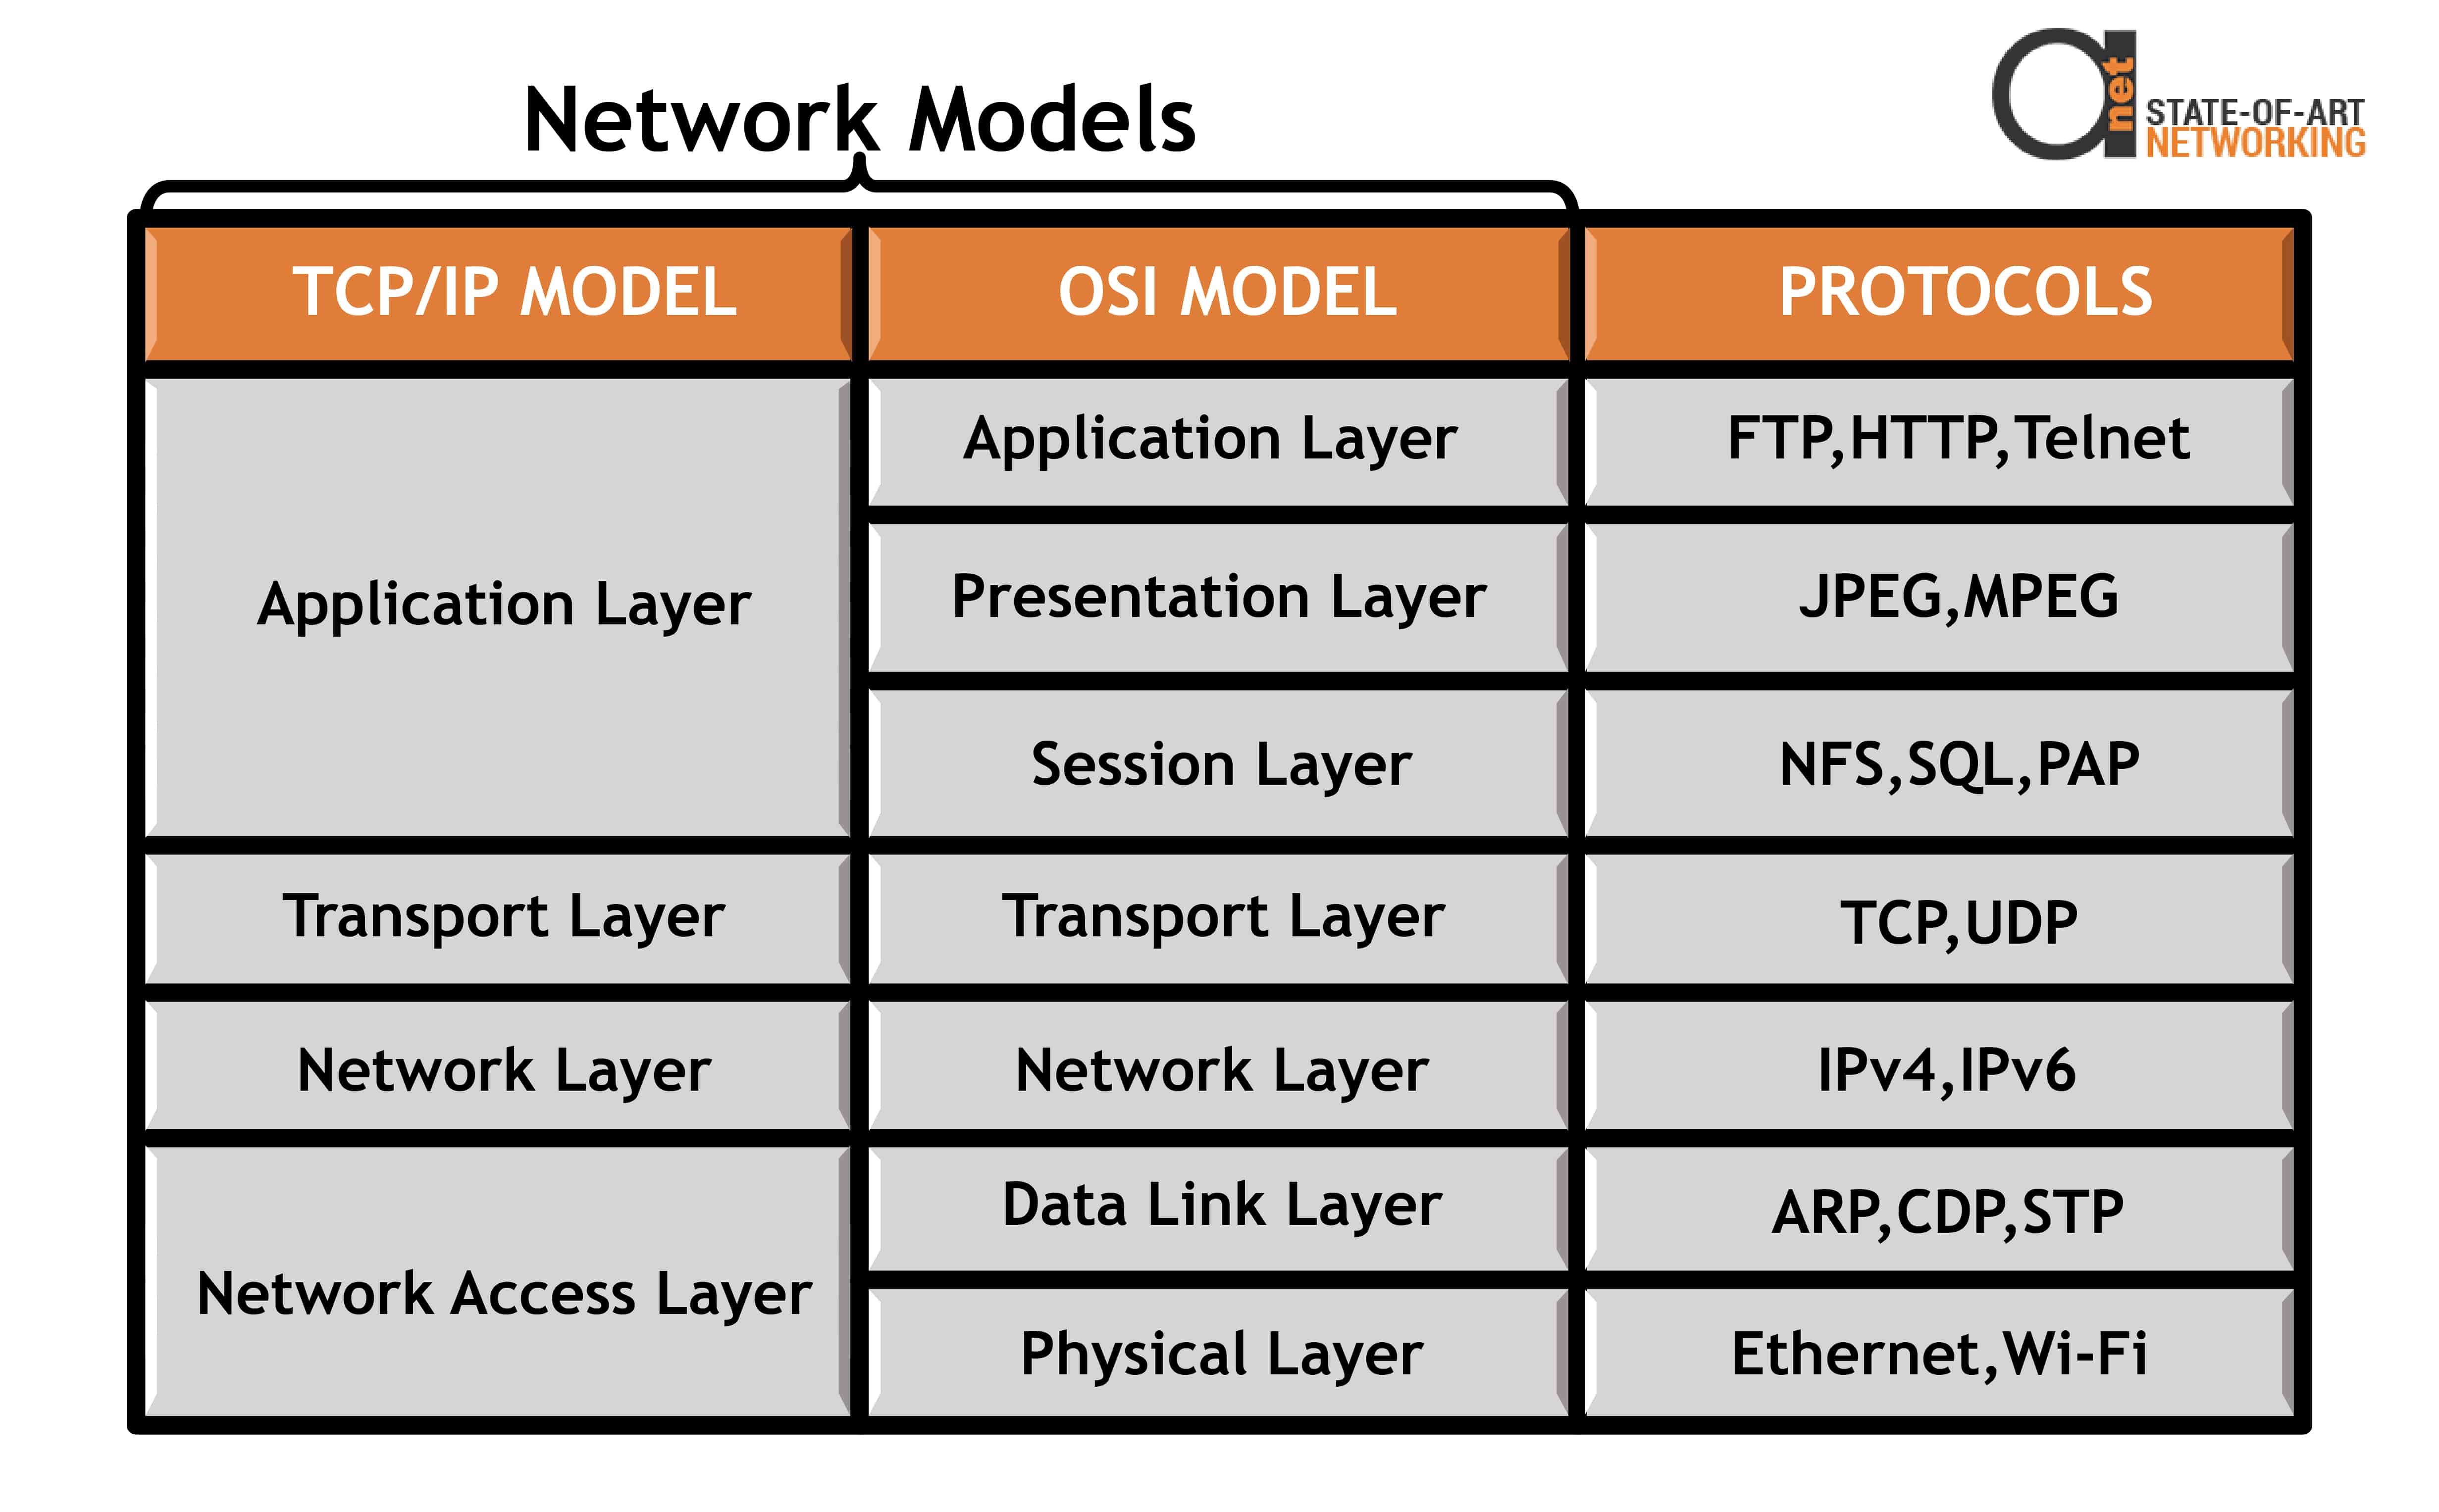 what are the protocols in the presentation layer